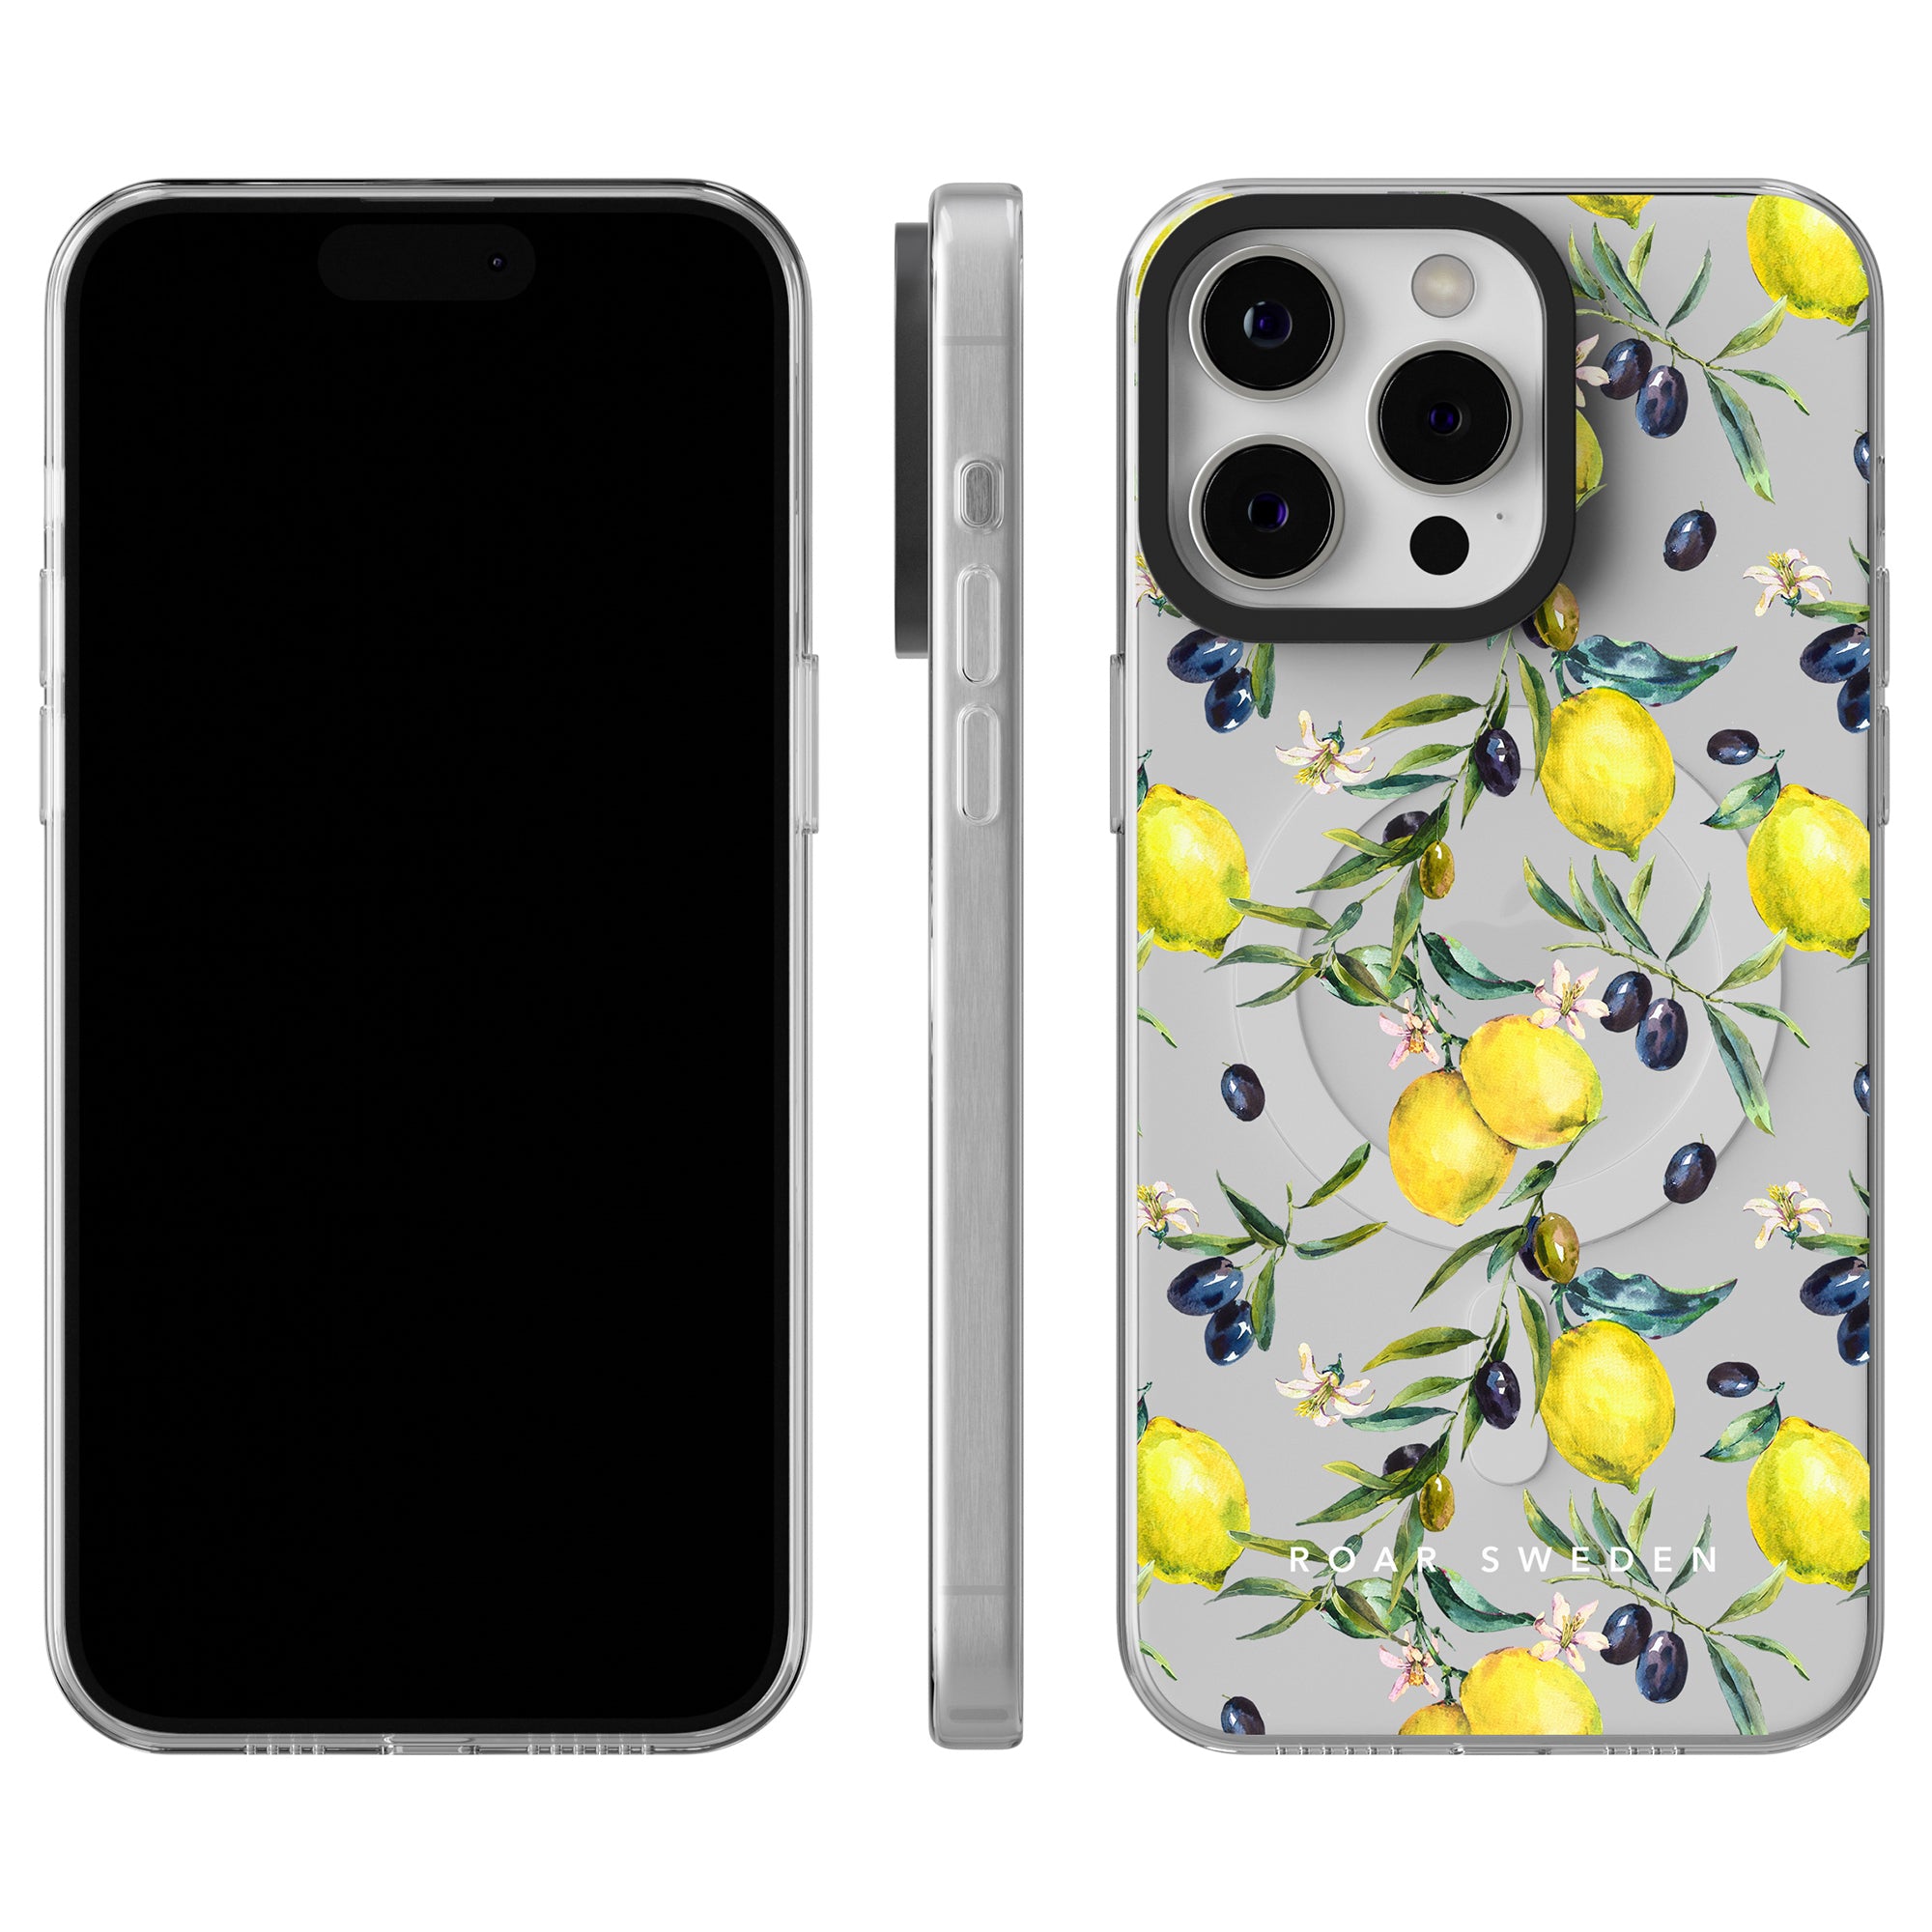 A smartphone with a floral and fruit patterned Lemon Garden - MagSafe Case is shown from three angles: front, side, and back. Part of the Lemon Collection, this stylish mobilaccessoar features lemons, olives, and leaves on a gray background.